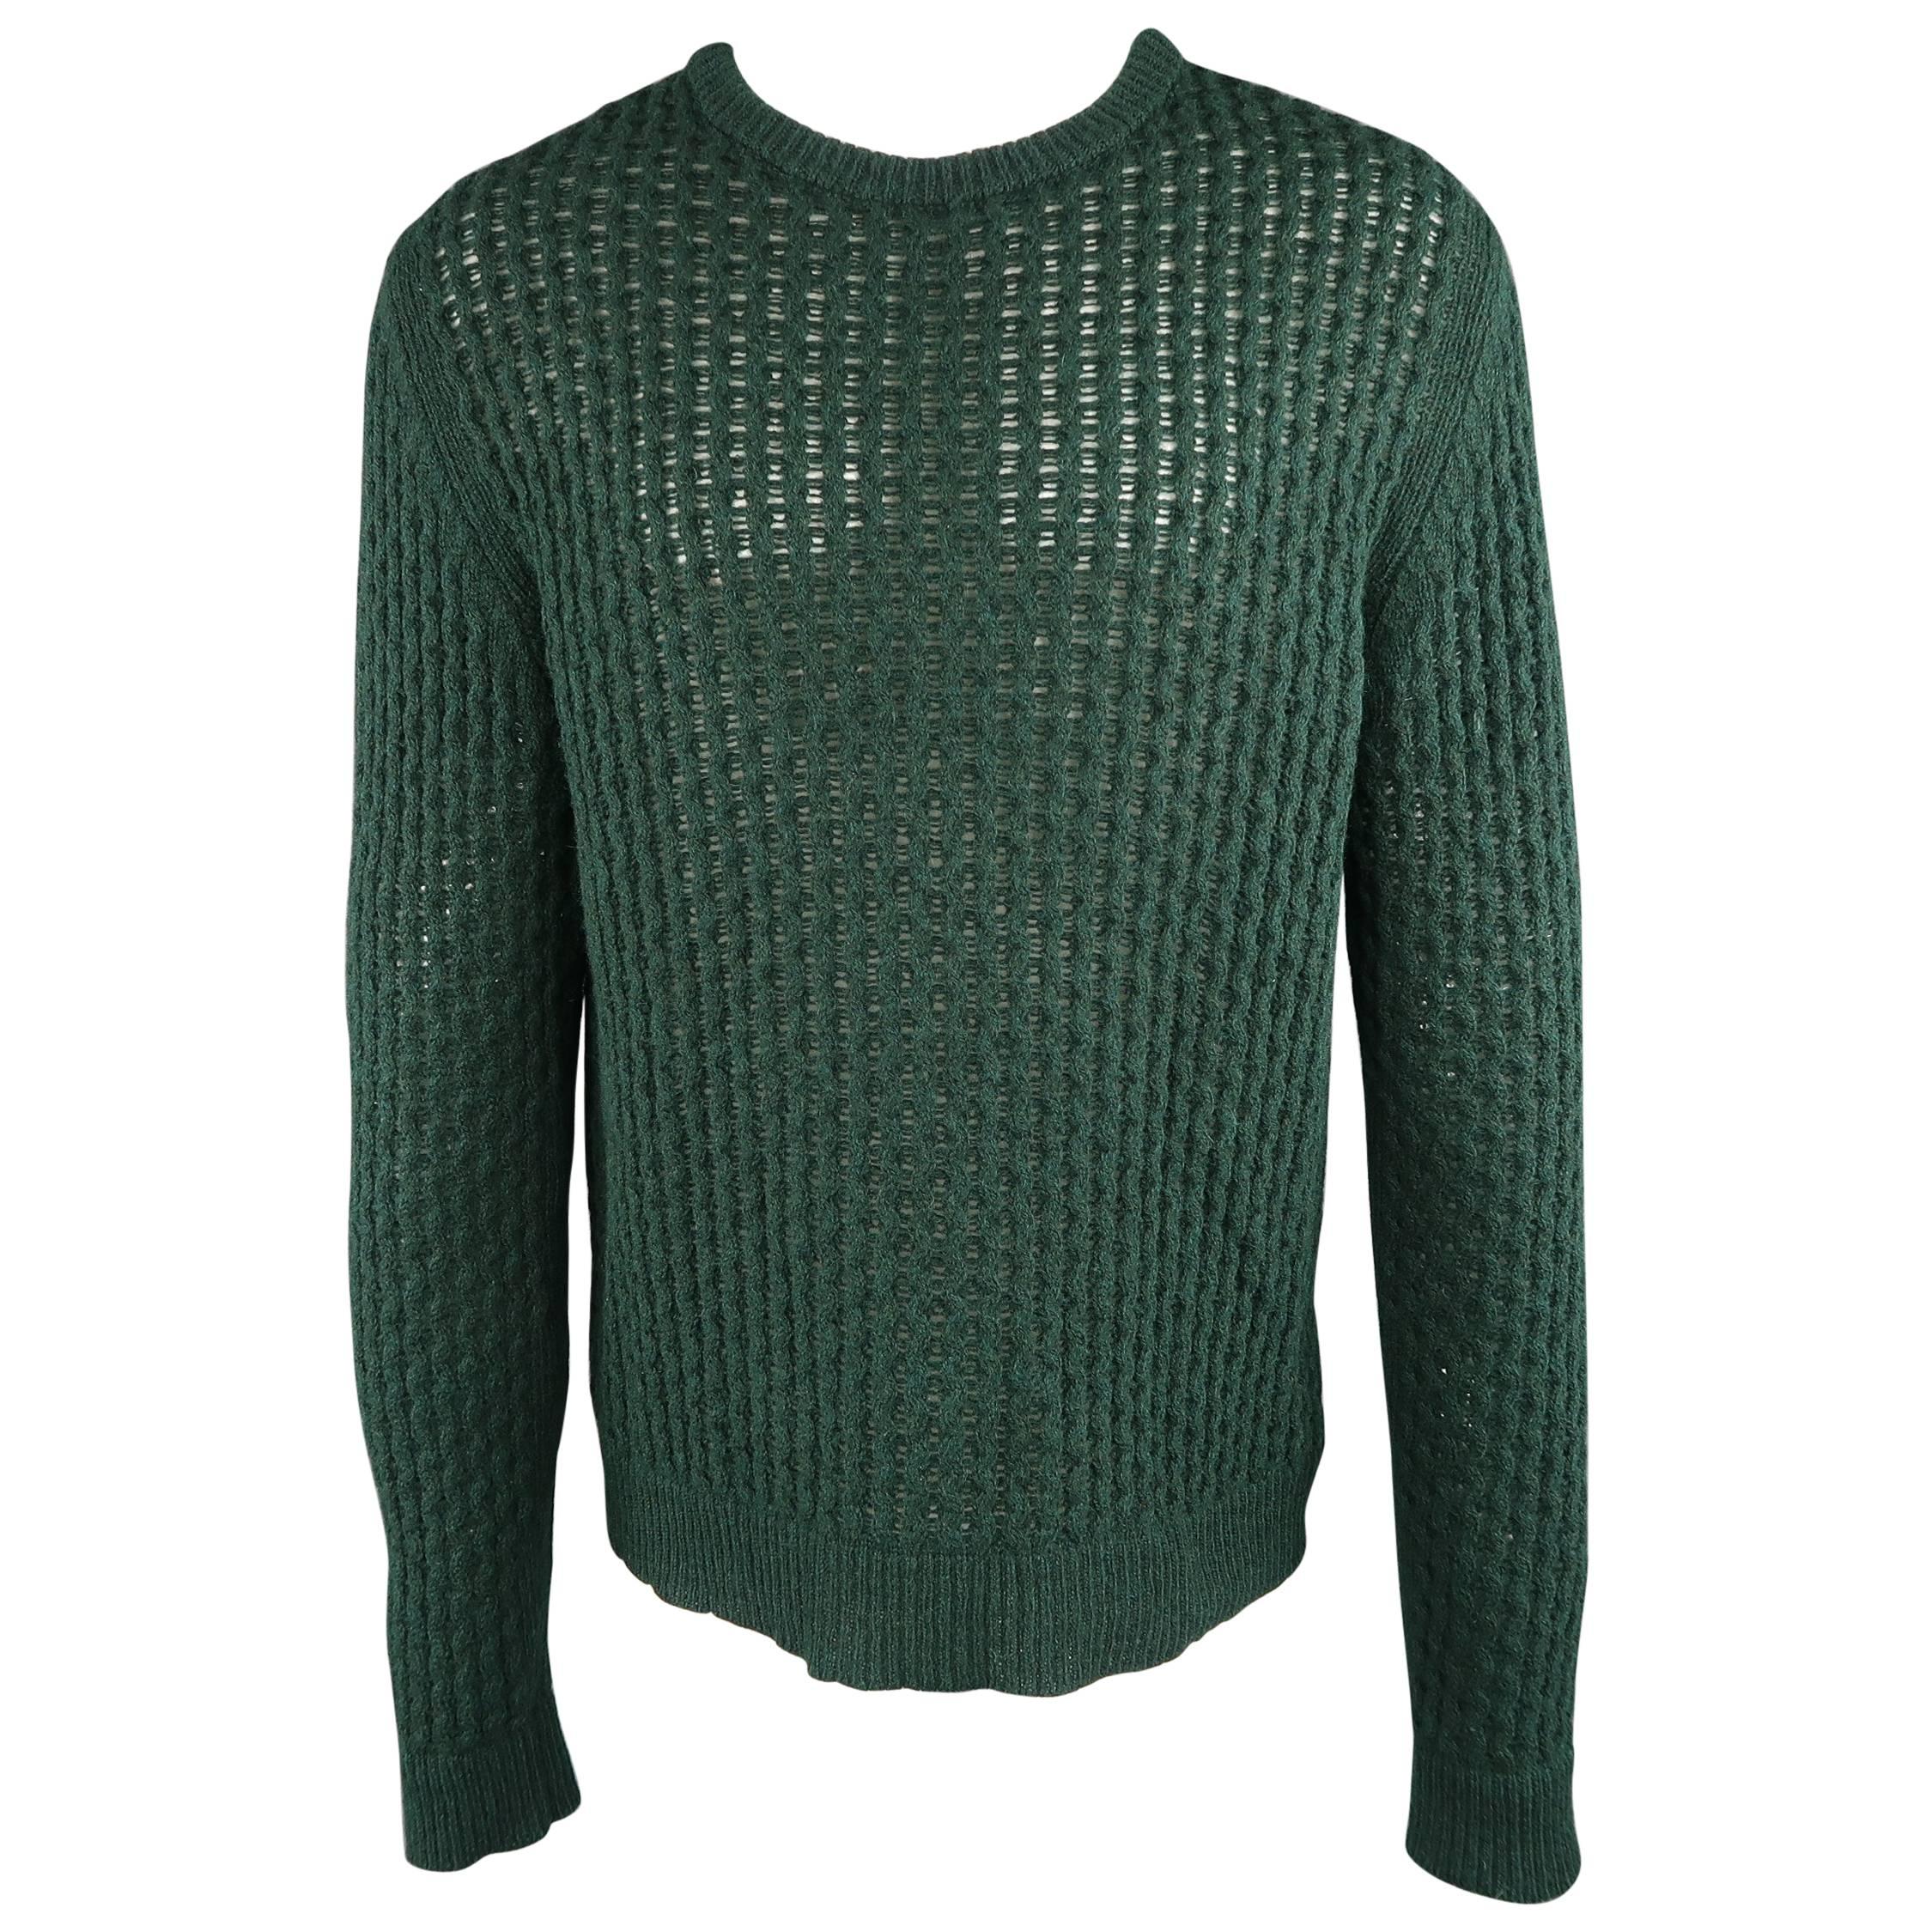 Men's RAF SIMONS Size M Forest Green Knitted Merino Wool Mesh Crewneck Sweater